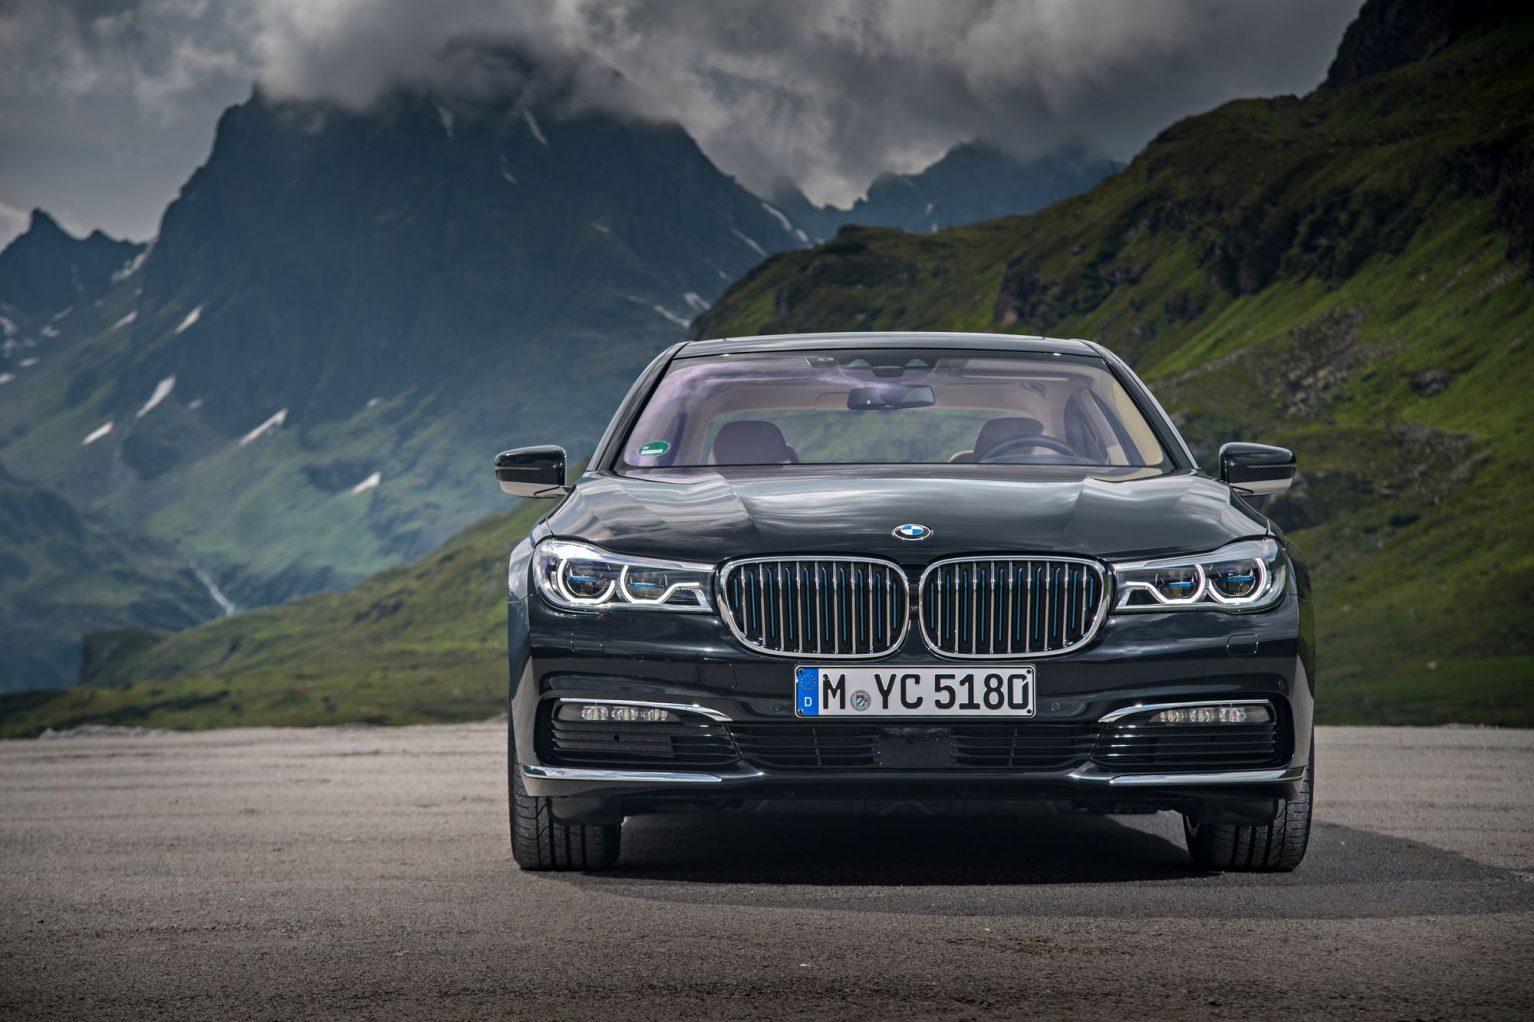 BMW 7 Series, Pricing, Release Date, Features, Engine